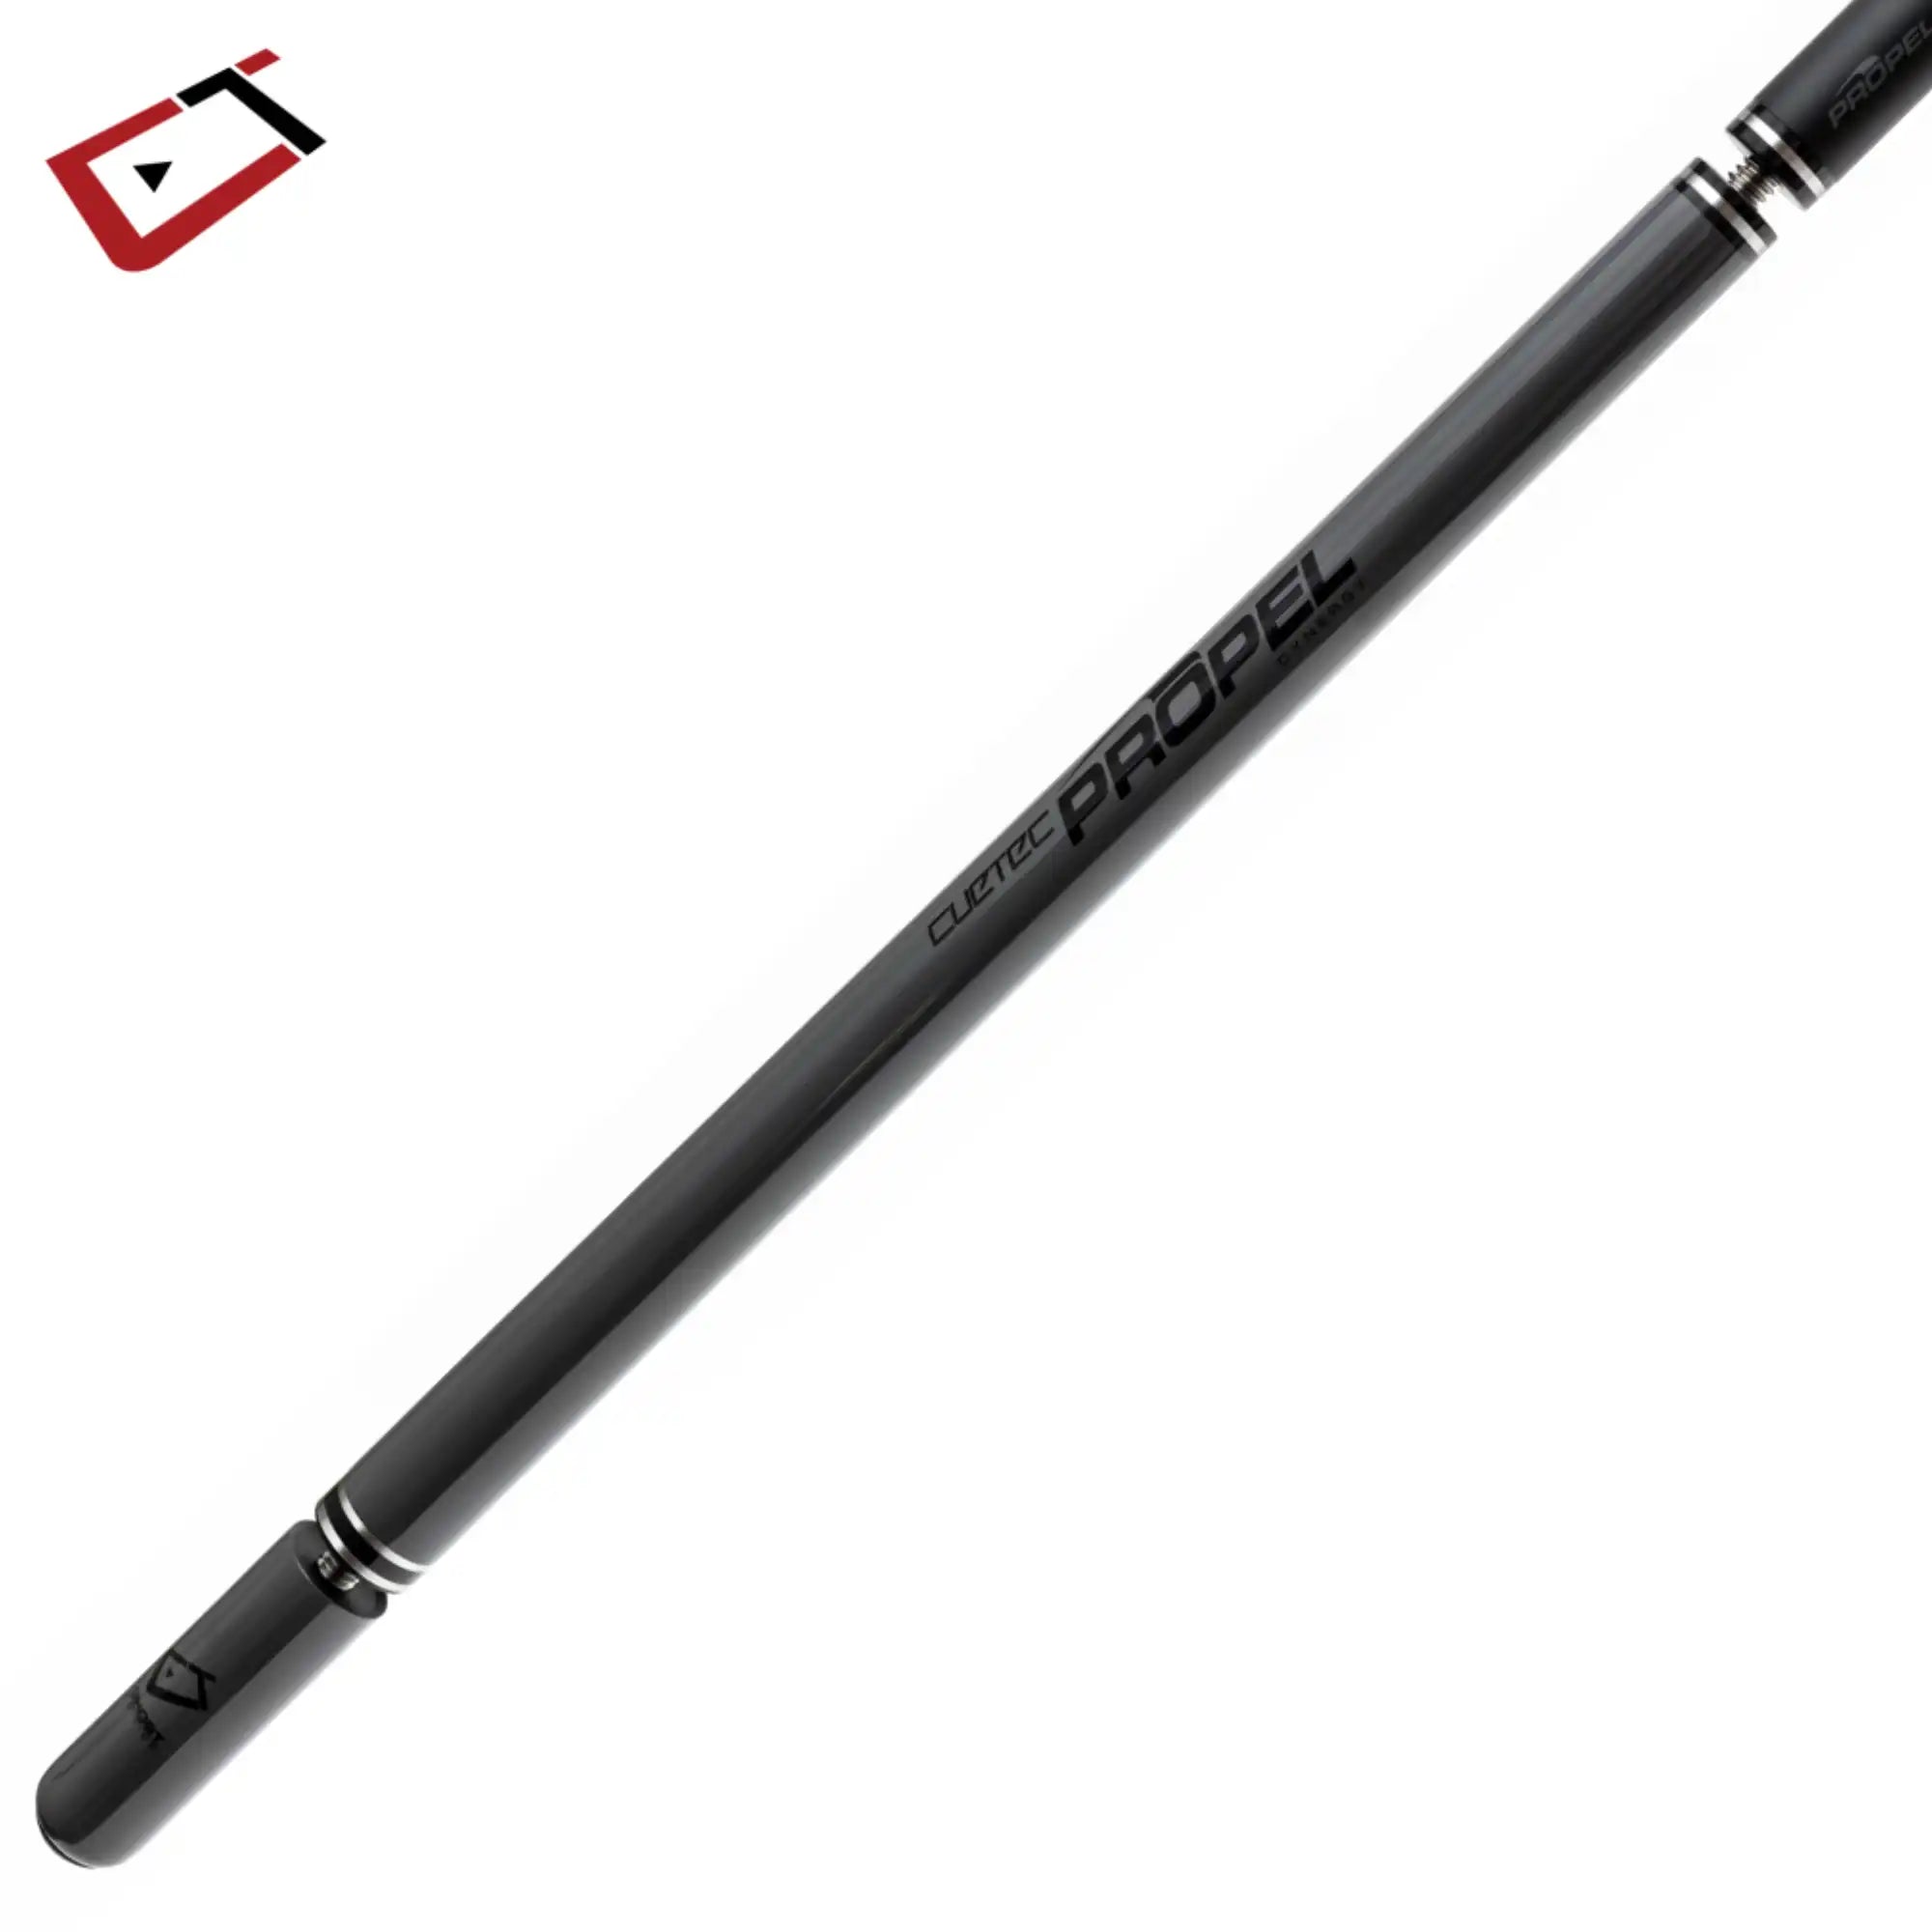 CYNERGY PROPEL JUMP CUE GHOST EDITION